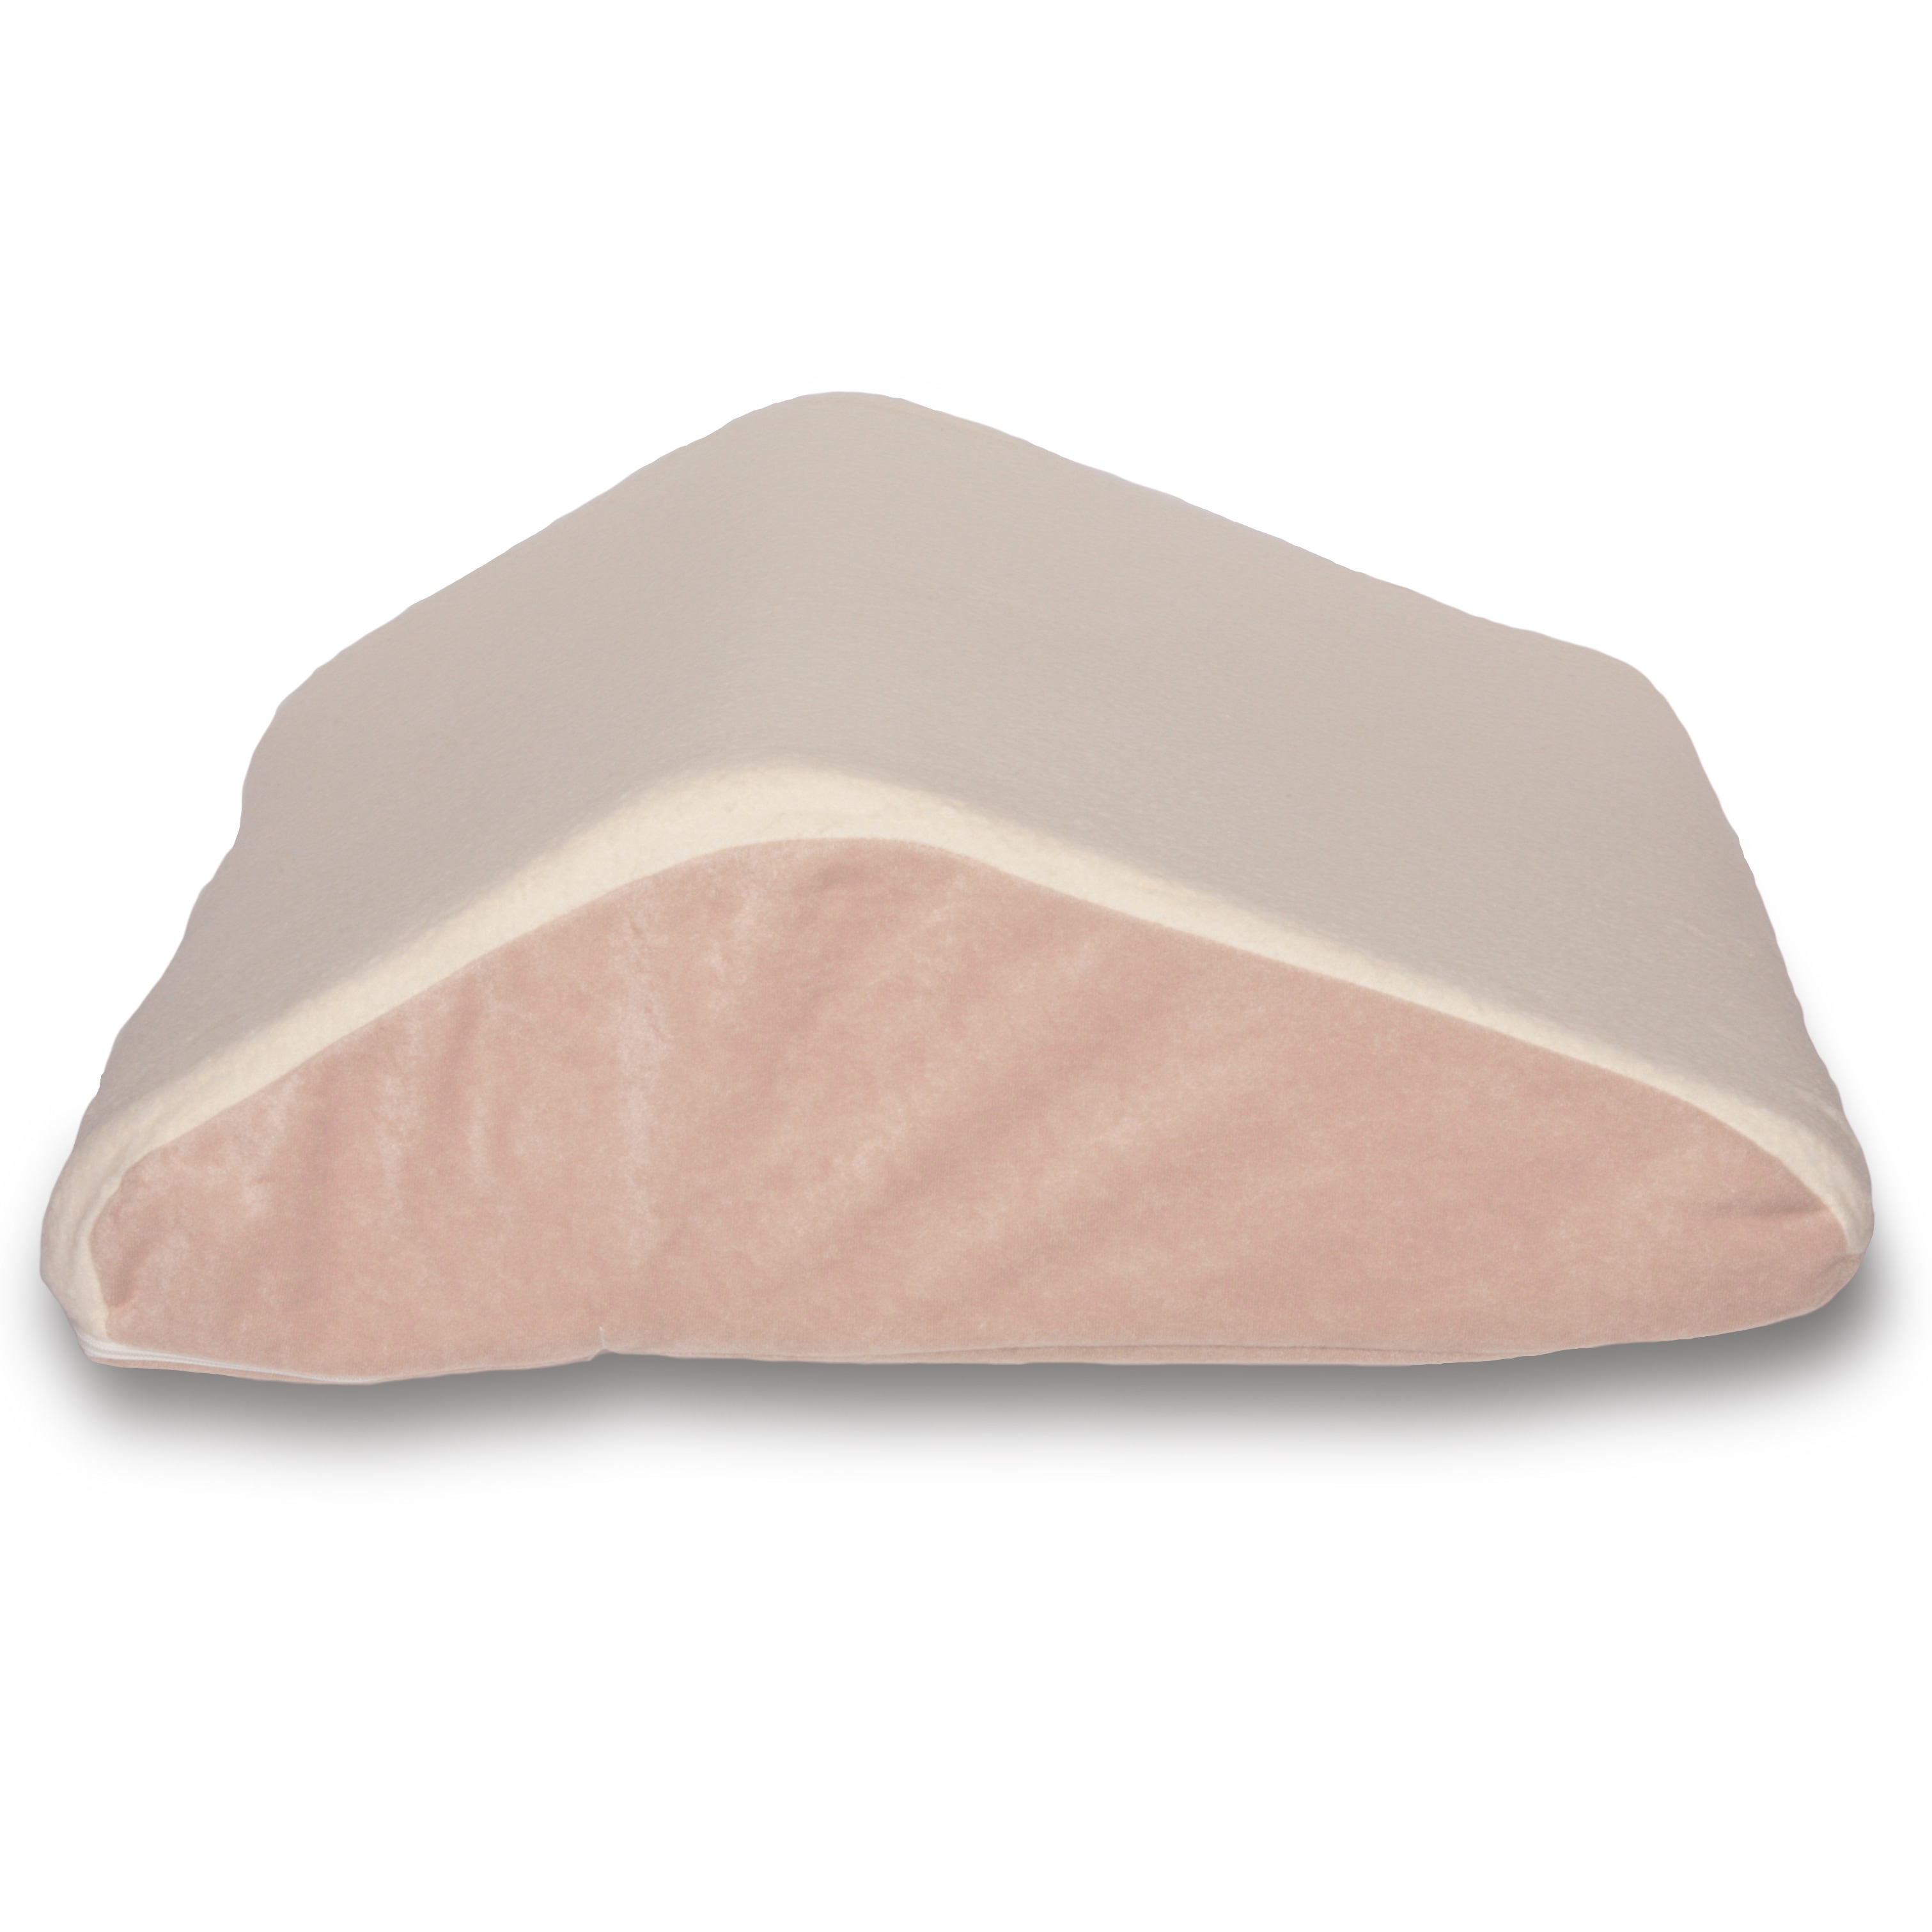 Nestl Knee Pillow with Cooling Cover and Adjustable Strap - Comfy